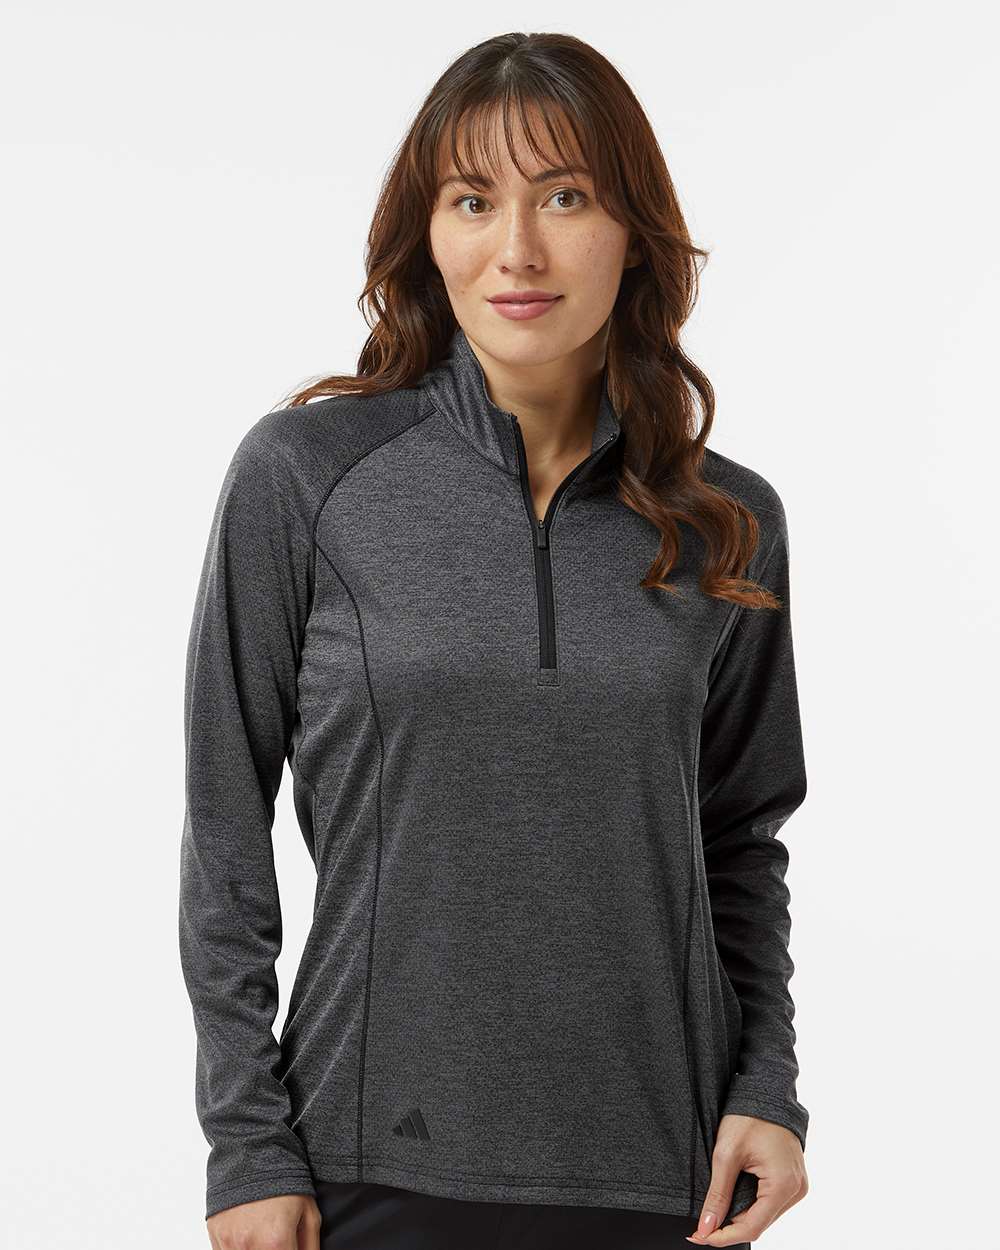 Adidas A594 Women's Space Dyed Quarter-Zip Pullover #colormdl_Black Melange